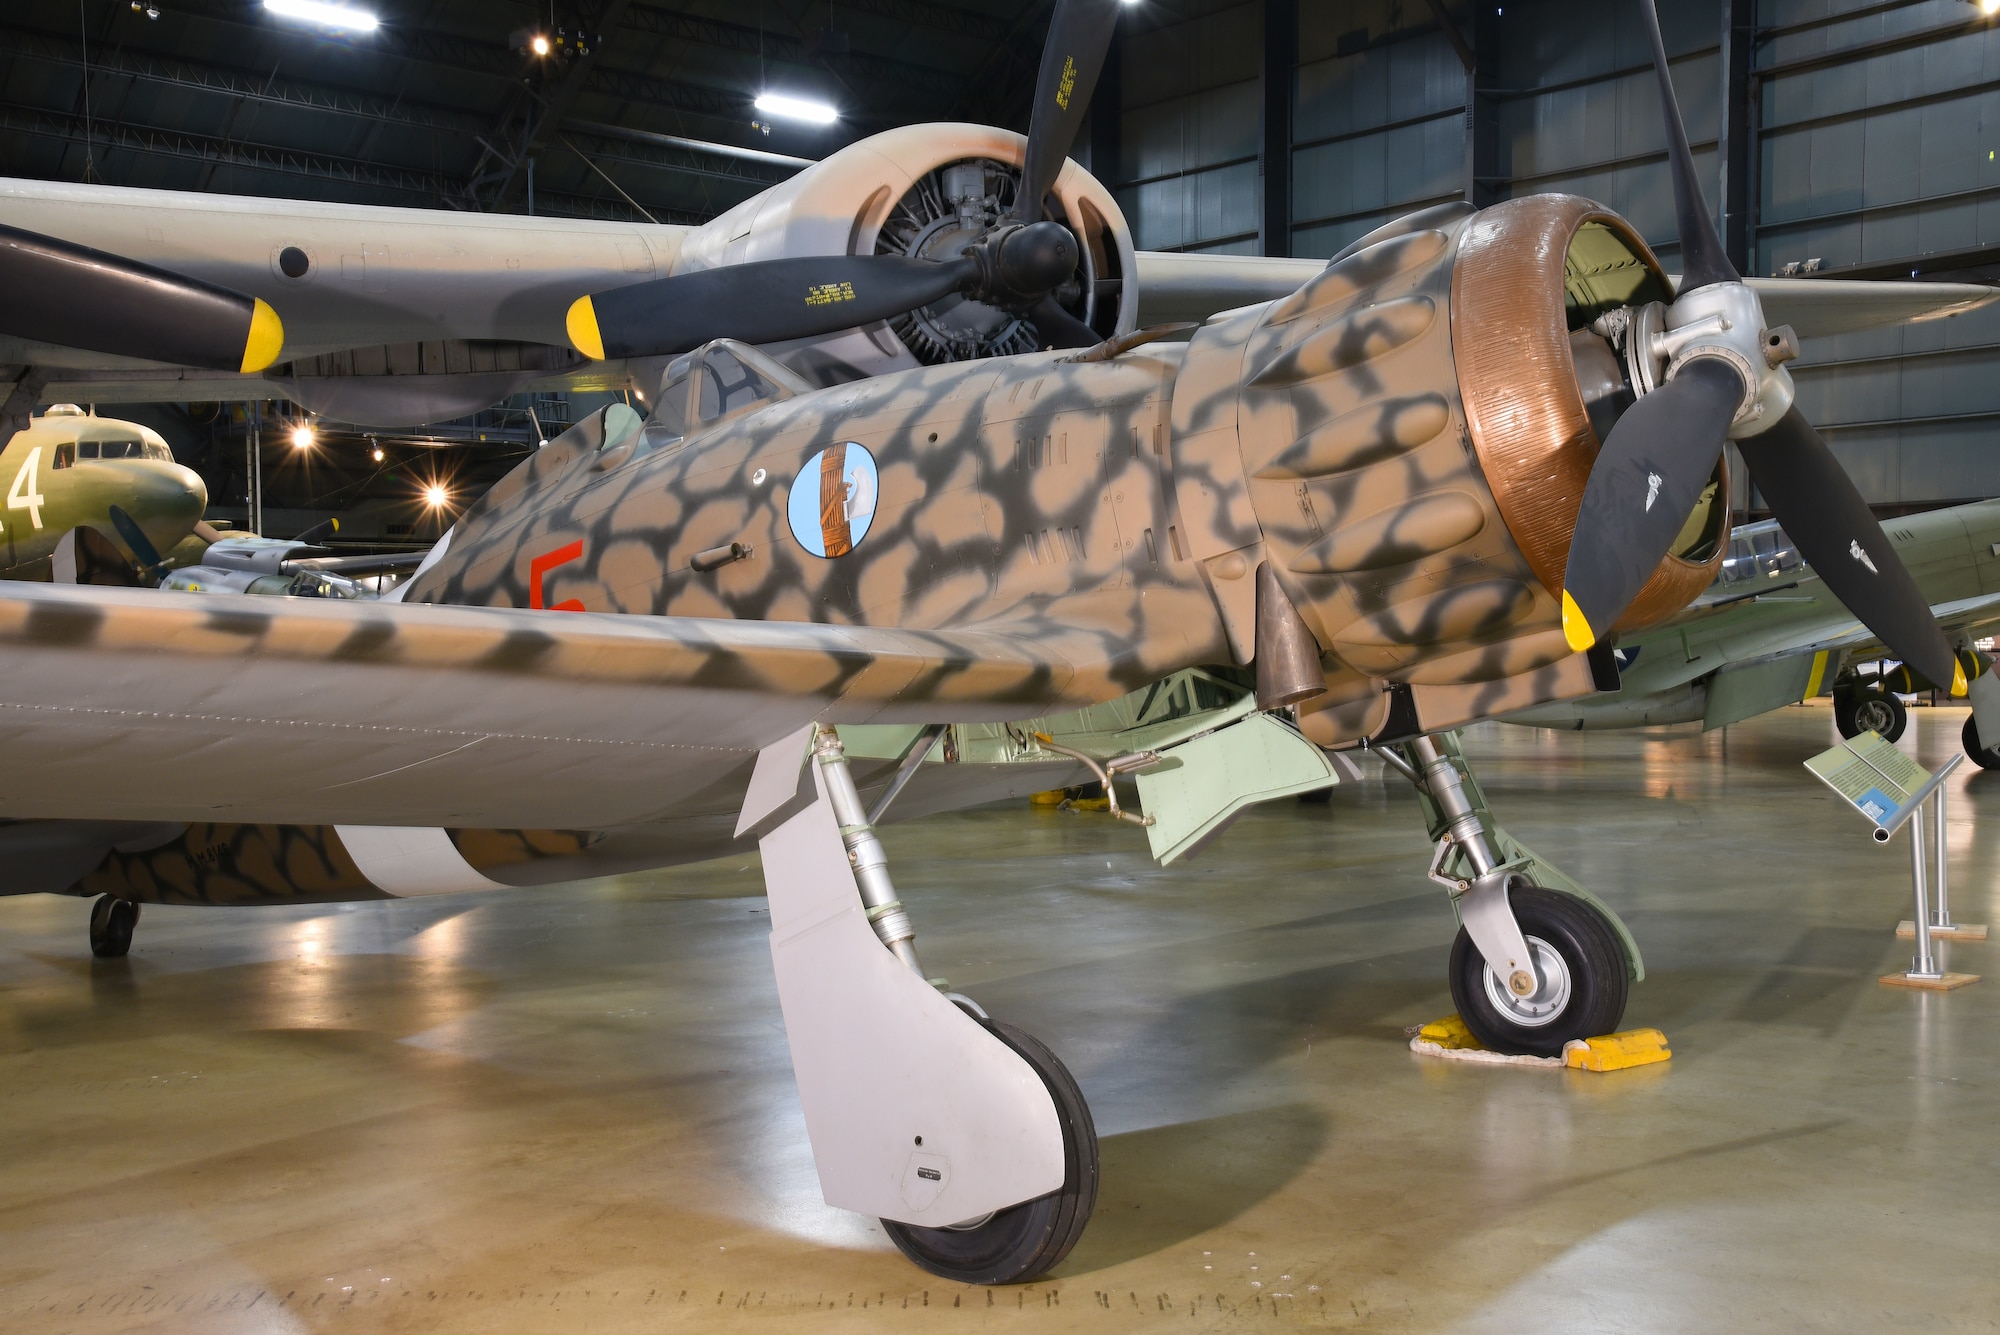 DAYTON, Ohio -- Macchi MC.200 Saetta in the WWII Gallery at the National Museum of the United States Air Force. (U.S. Air Force photo by Ken LaRock)